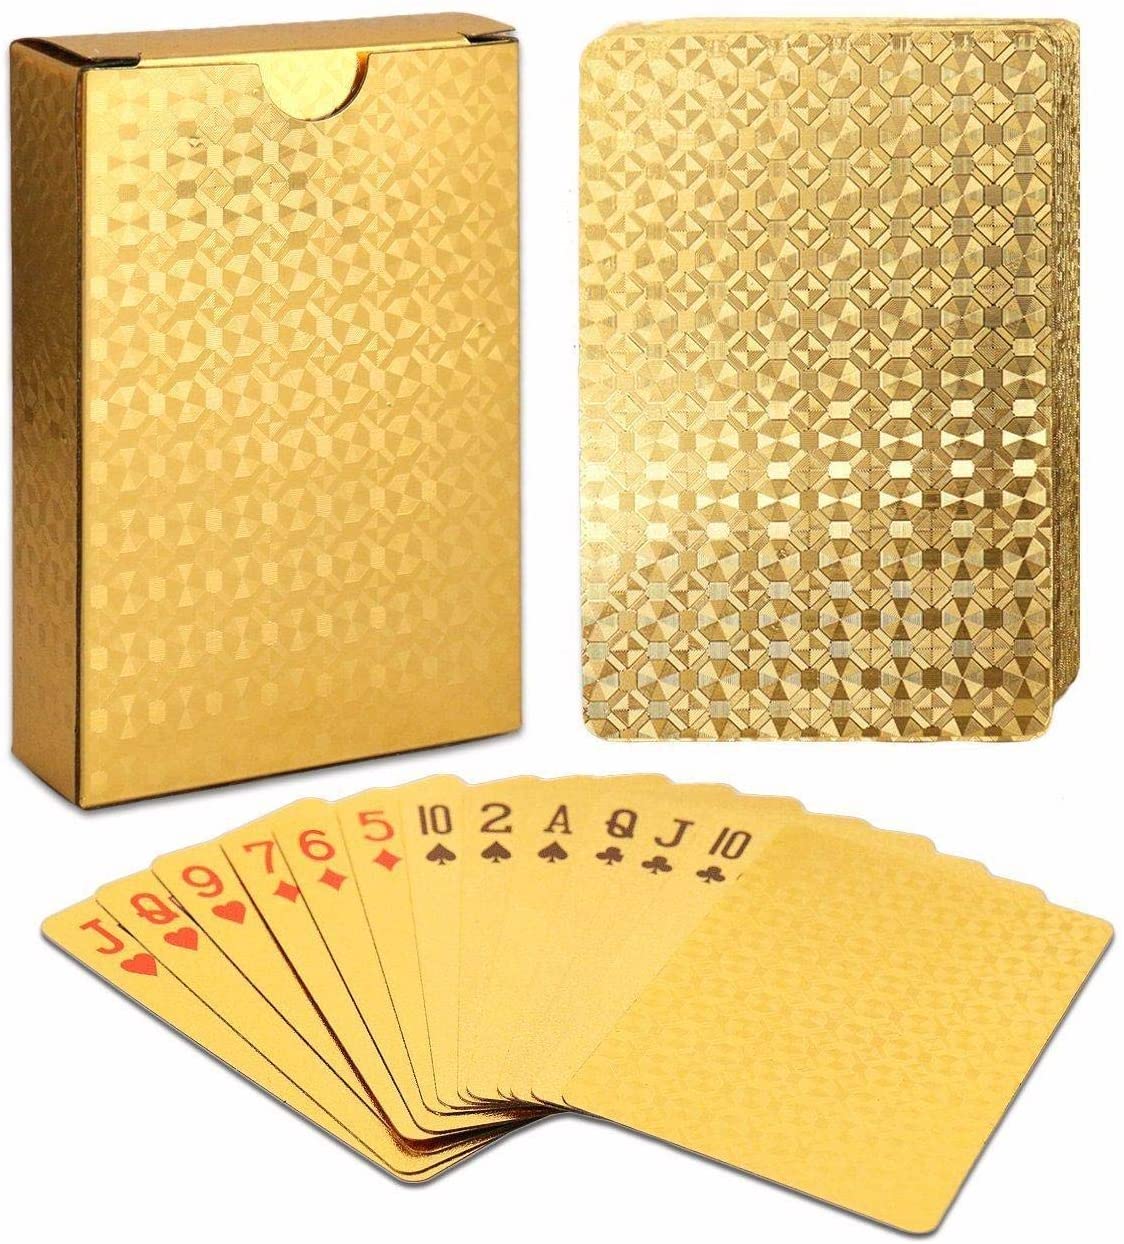 Gold Foil Plastic Card Pvc Waterproof 24k Table Game Playing Cards Deck Gift Thickened Card, Matte Touch